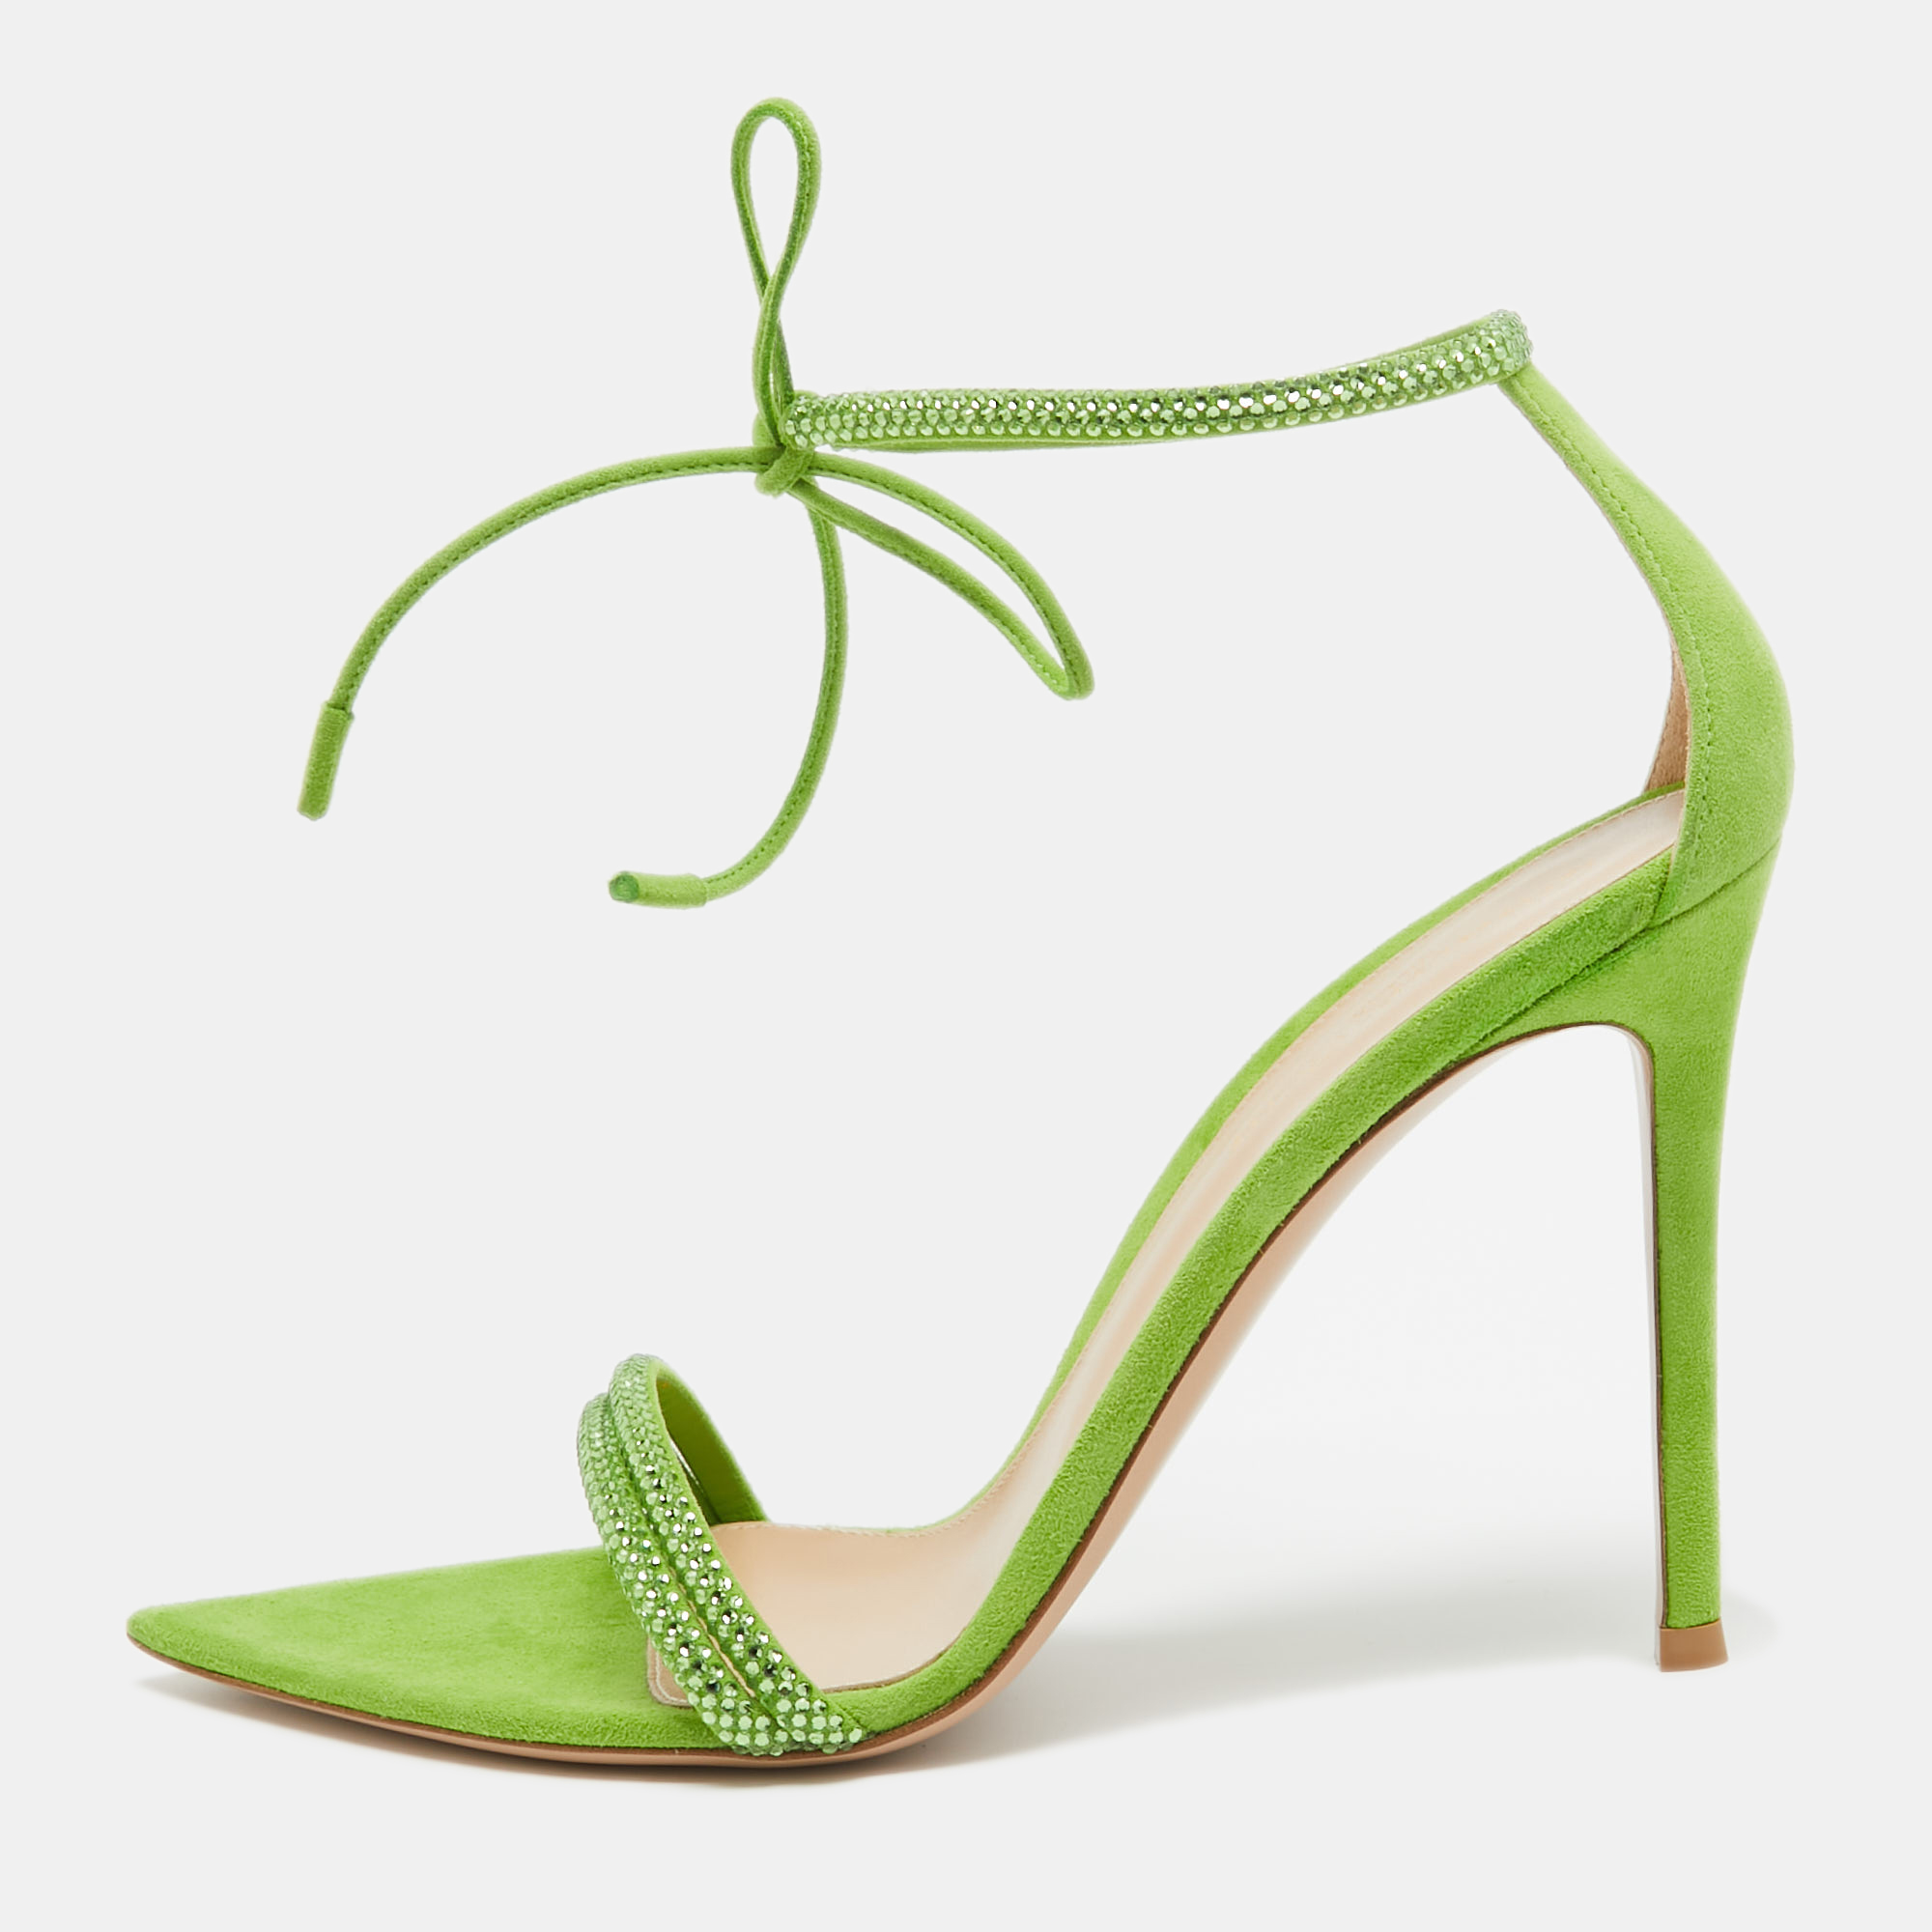 Gianvito rossi green suede embellished montecarlo sandals size 36.5